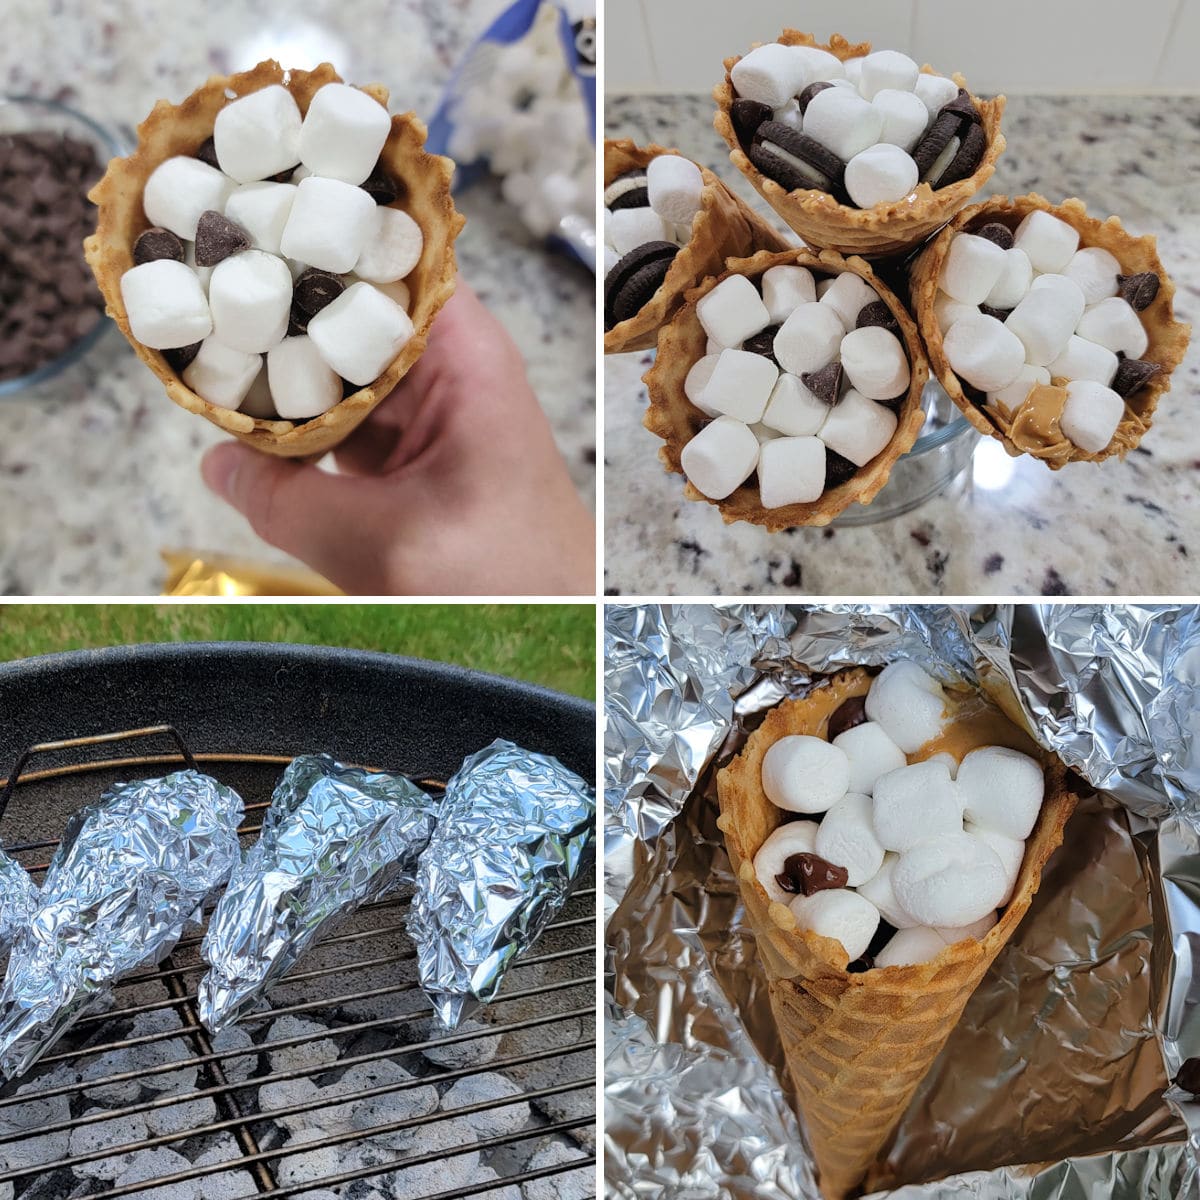 Making s'mores cones on the grill.